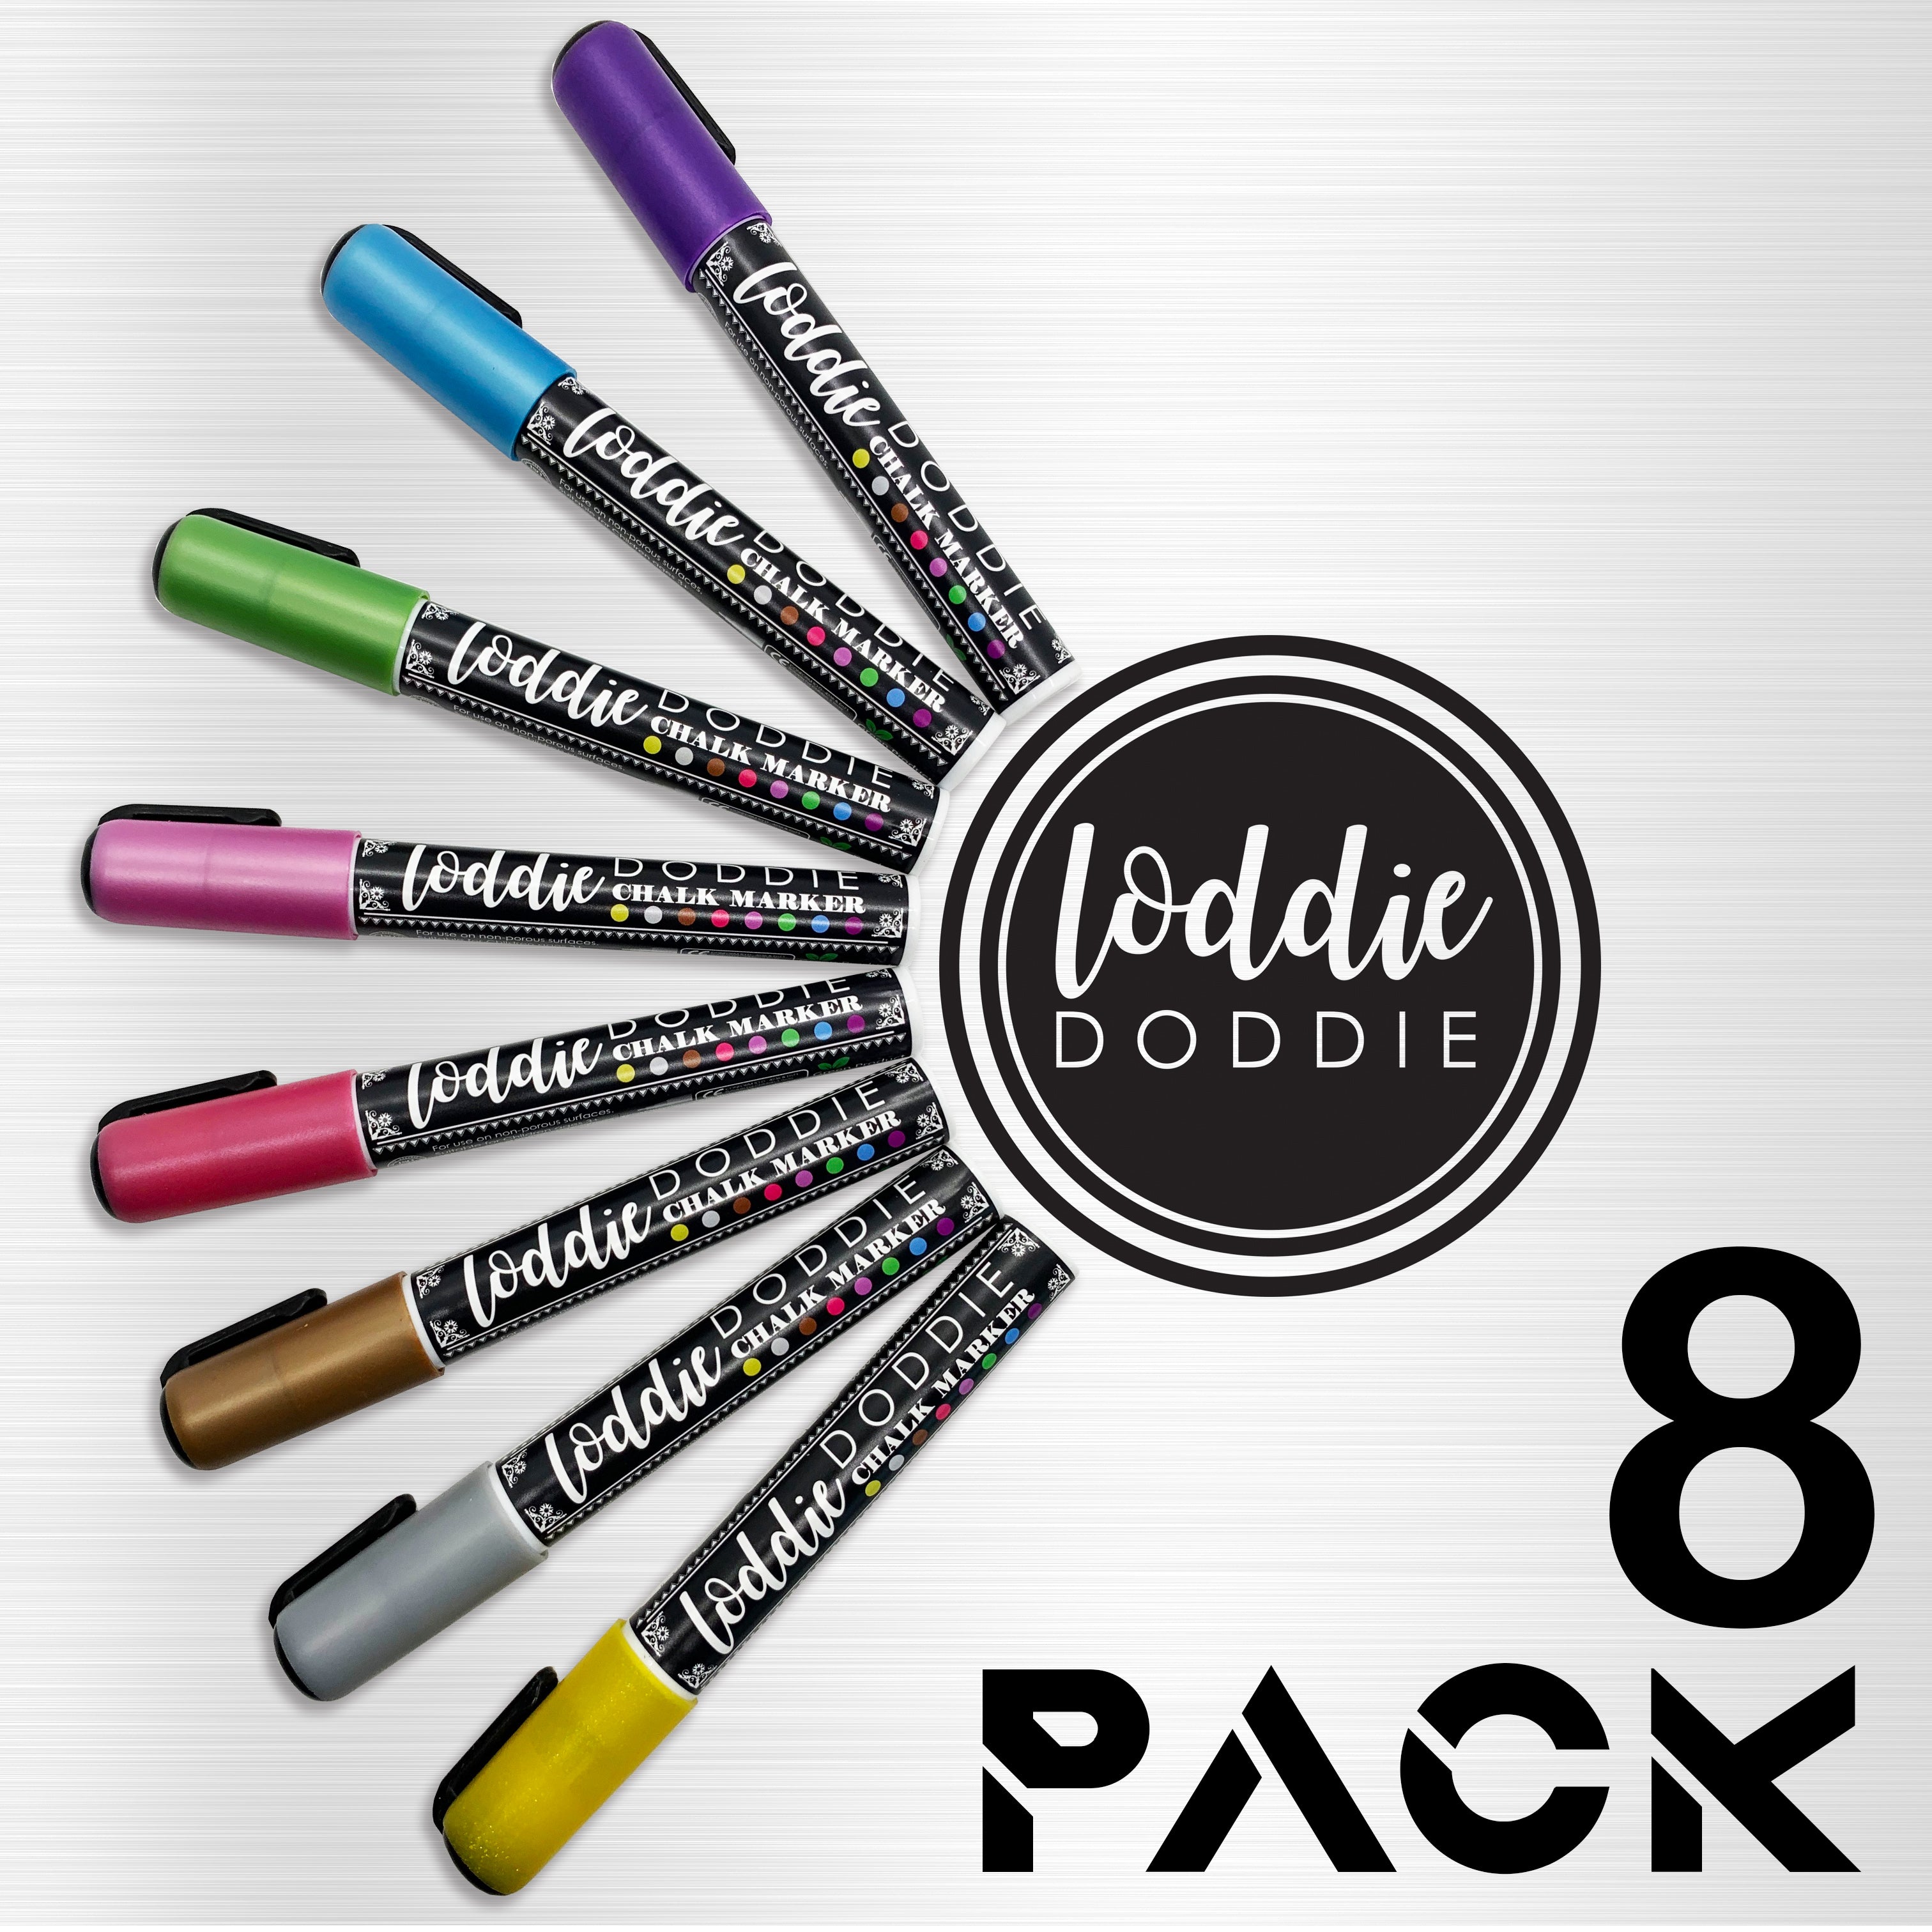 Fun fact! Loddie Doddie chalk markers work great on any glass surface such  as a mirror! They wipe away with just a damp cloth! So, now you can  easily